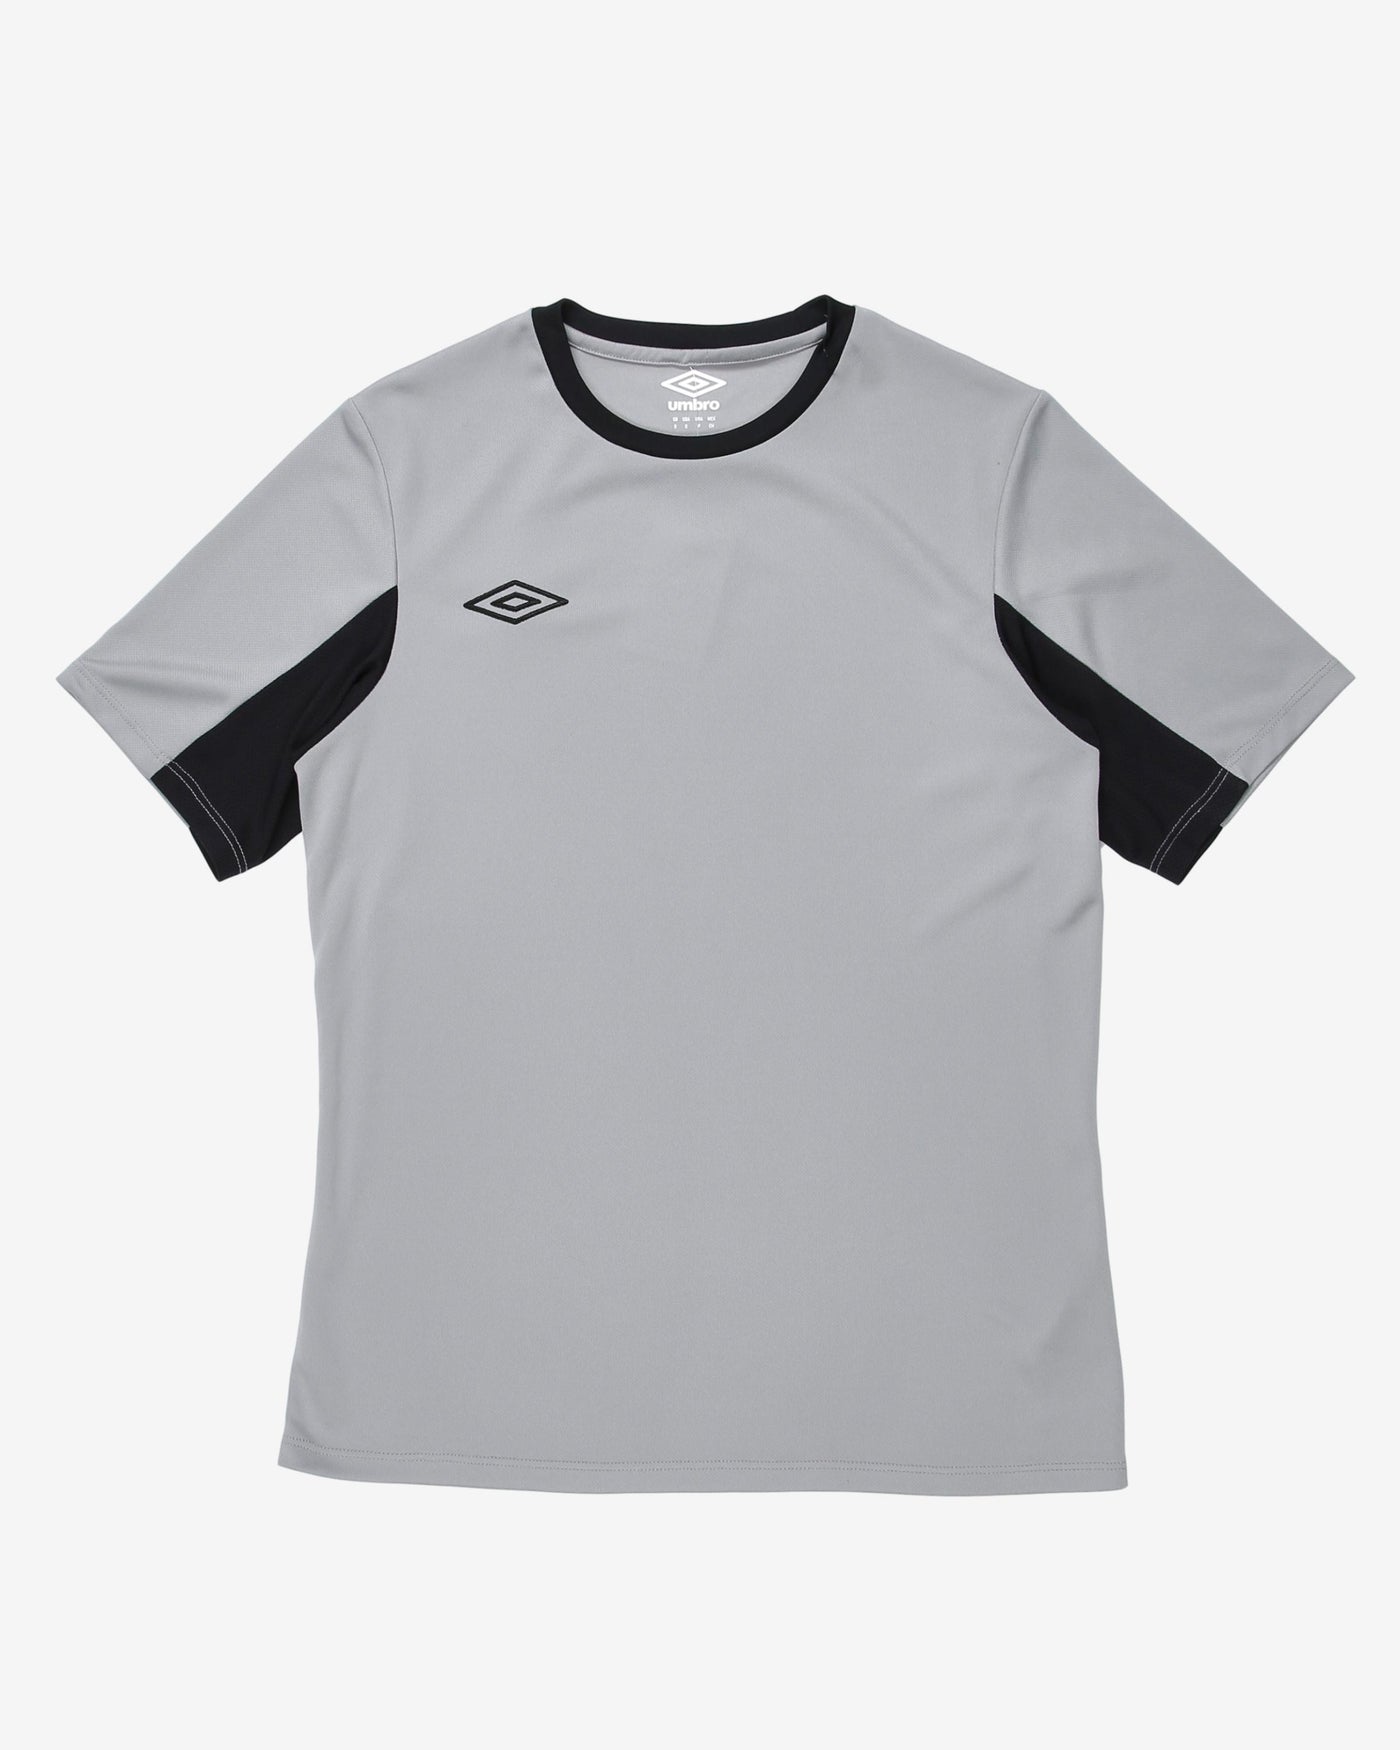 Umbro Football Work Out Top T-Shirt - S